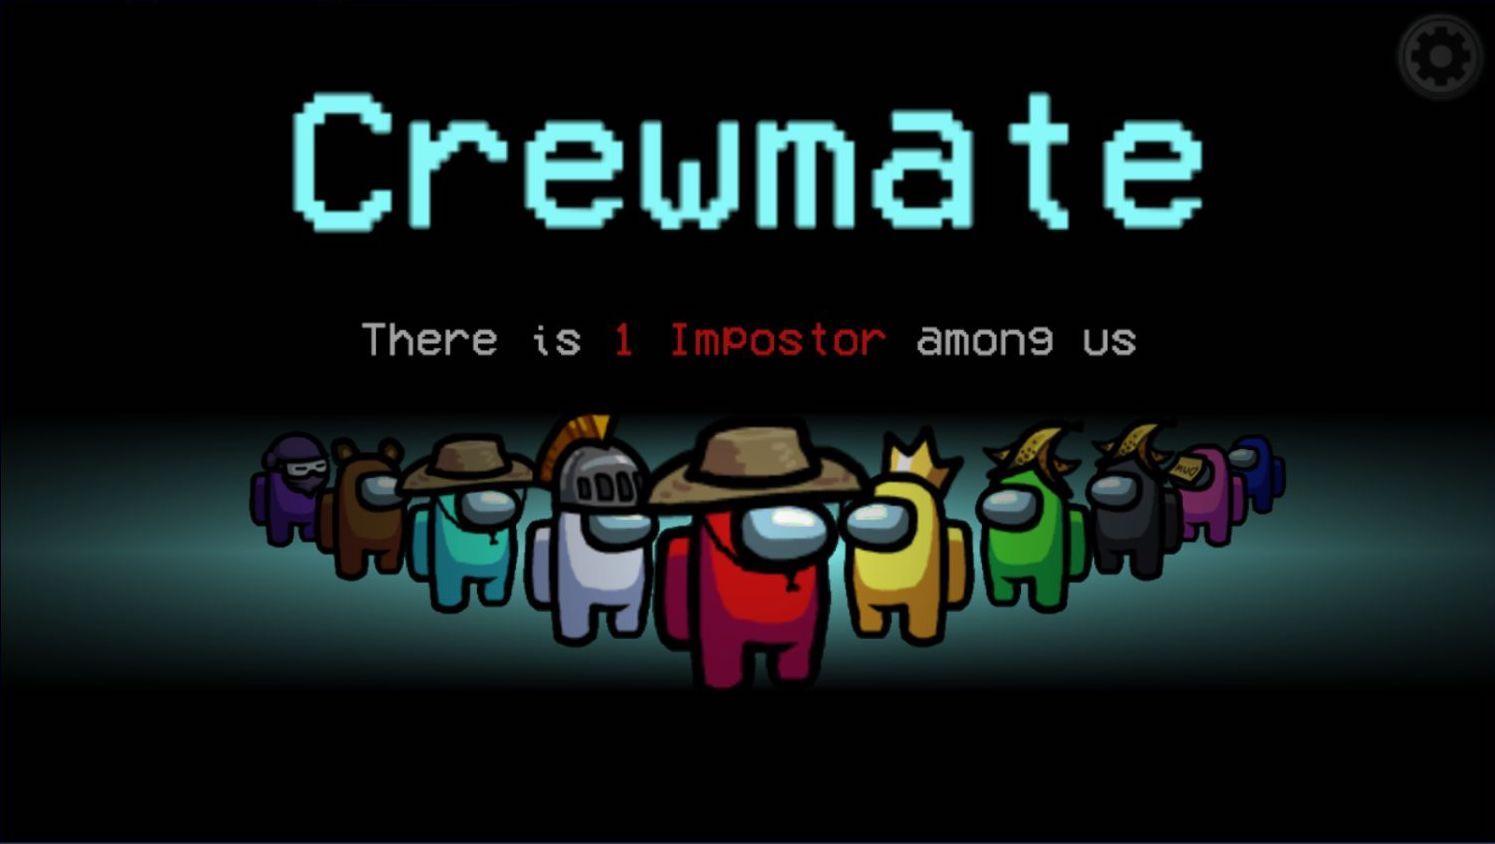 Among Us' crewmate guide: 5 tips to outsmart the imposter